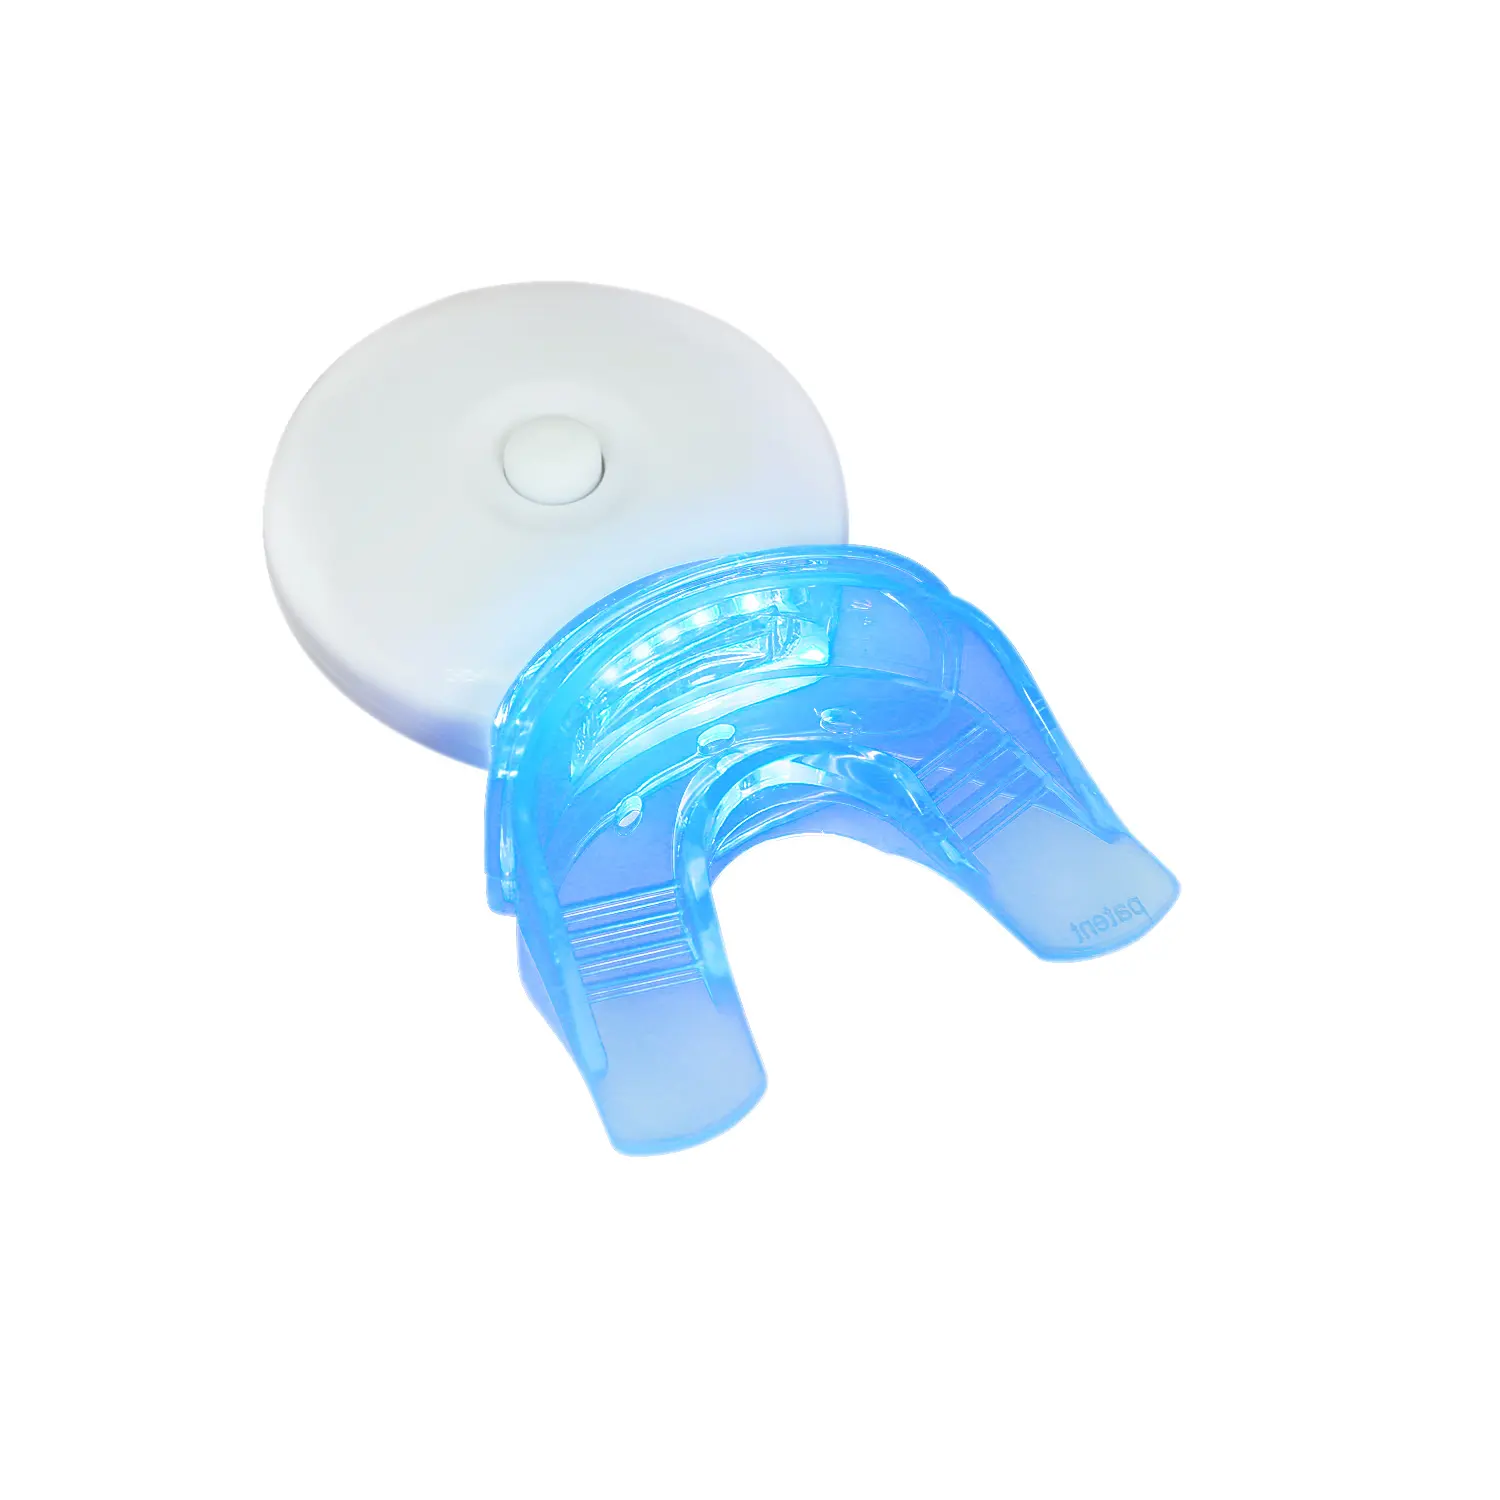 Batteries Included Teeth Whitening LED Light 5X LED Accelerator Light and Tray Teeth Whitener